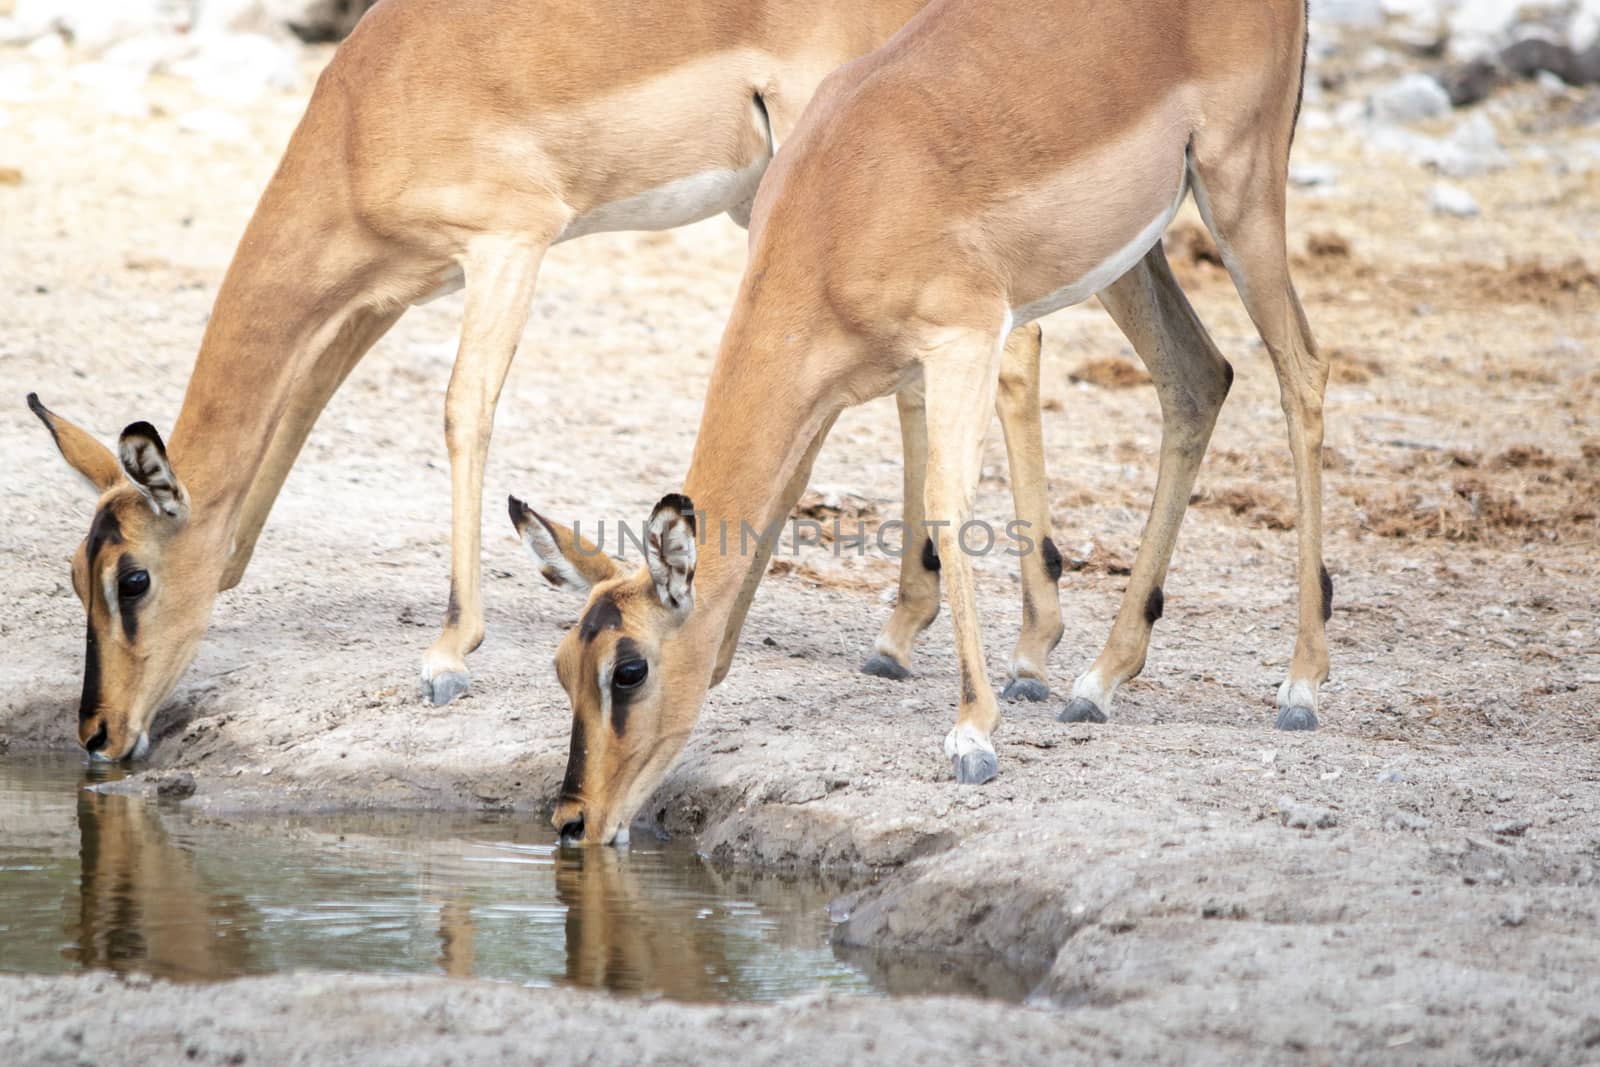 Two impala antelopes drinking water from a waterhole in the African savannah during a safari trip in Etosha National Park in Namibia